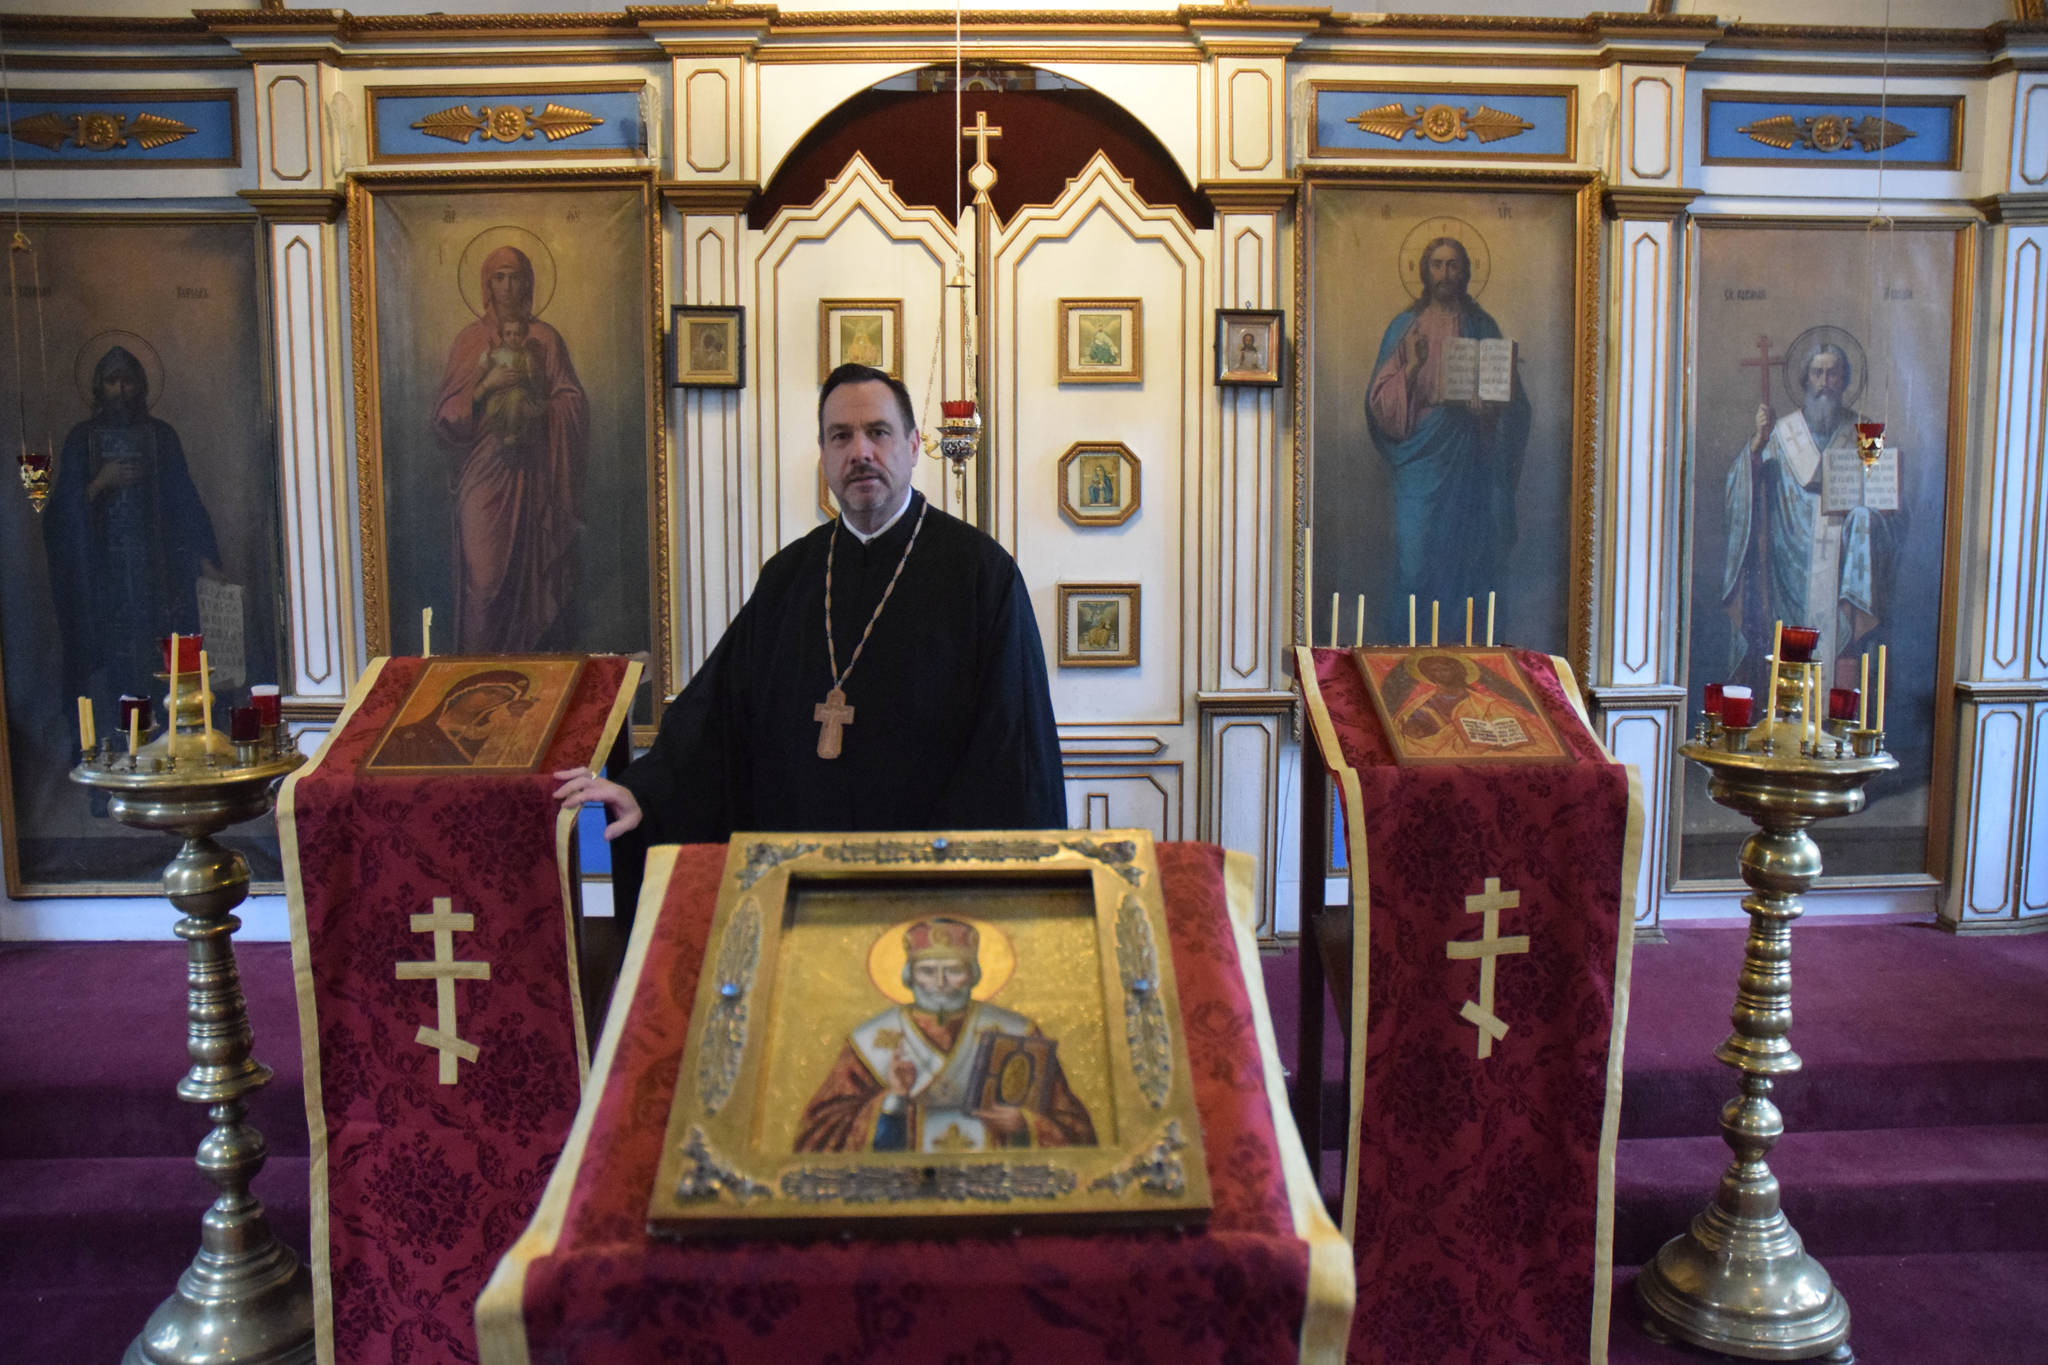 Father Steven McGuigan poses in front of the icon of St. Nicholas at St. Nicholas Russian Orthodox Church on Friday. (Kevin Gullufsen | Juneau Empire)